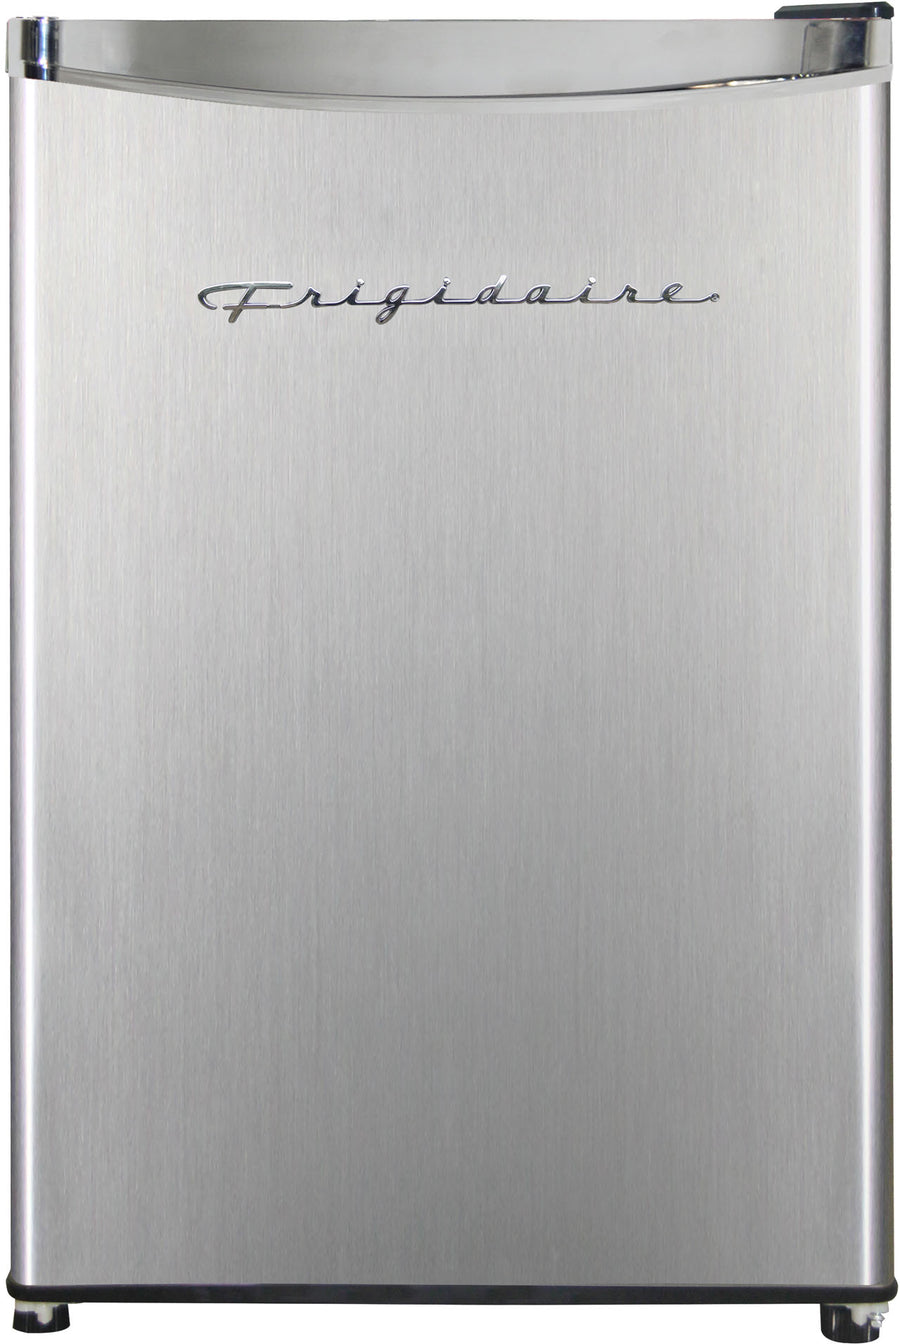 Frigidaire - Platinum Series Retro 3.2 Cu. Ft. Compact Fridge - Stainless with Chrome Trim - Stainless steel_0